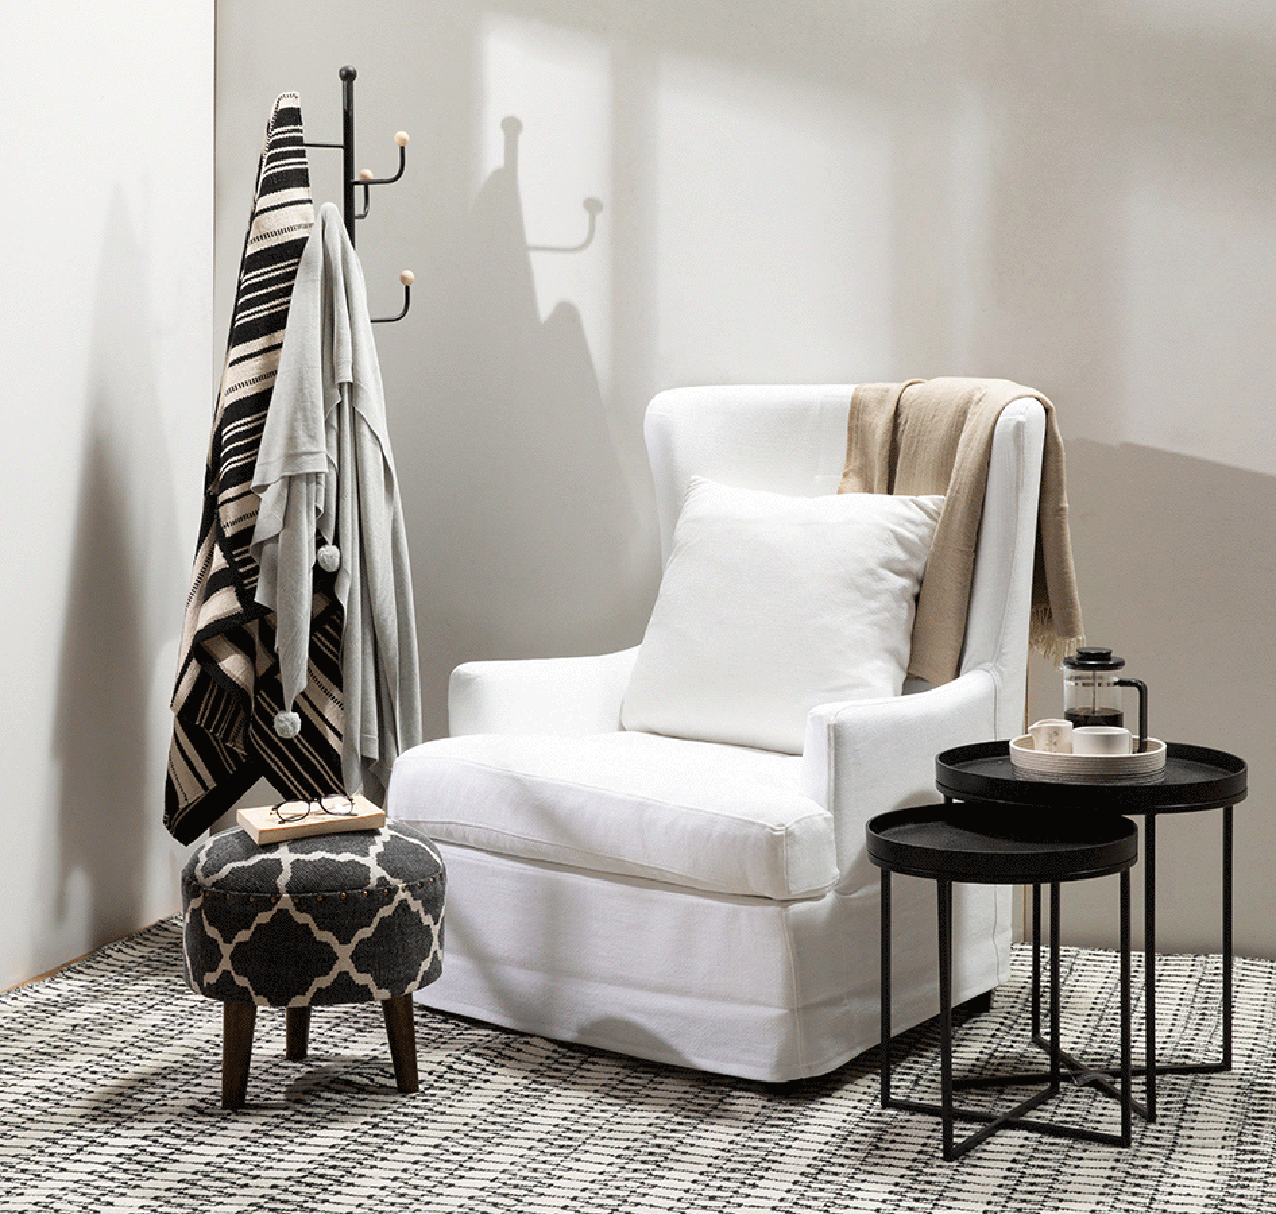 A classic slipcover armchair in linen with foot stool and side table make a perfect reading corner